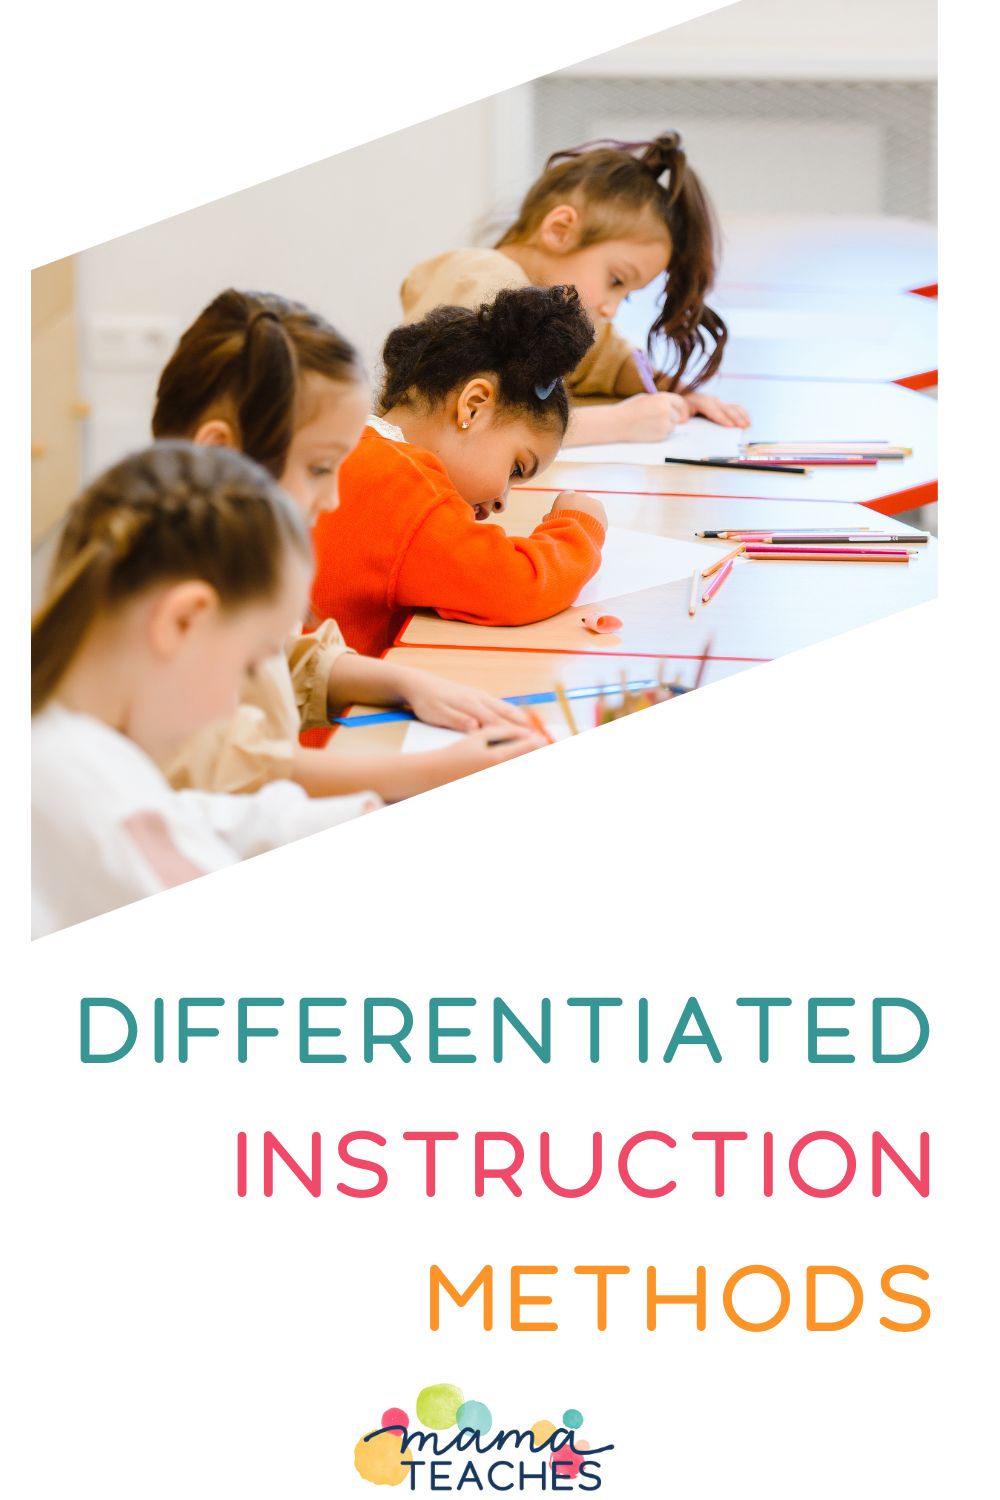 Differentiated Instruction Methods